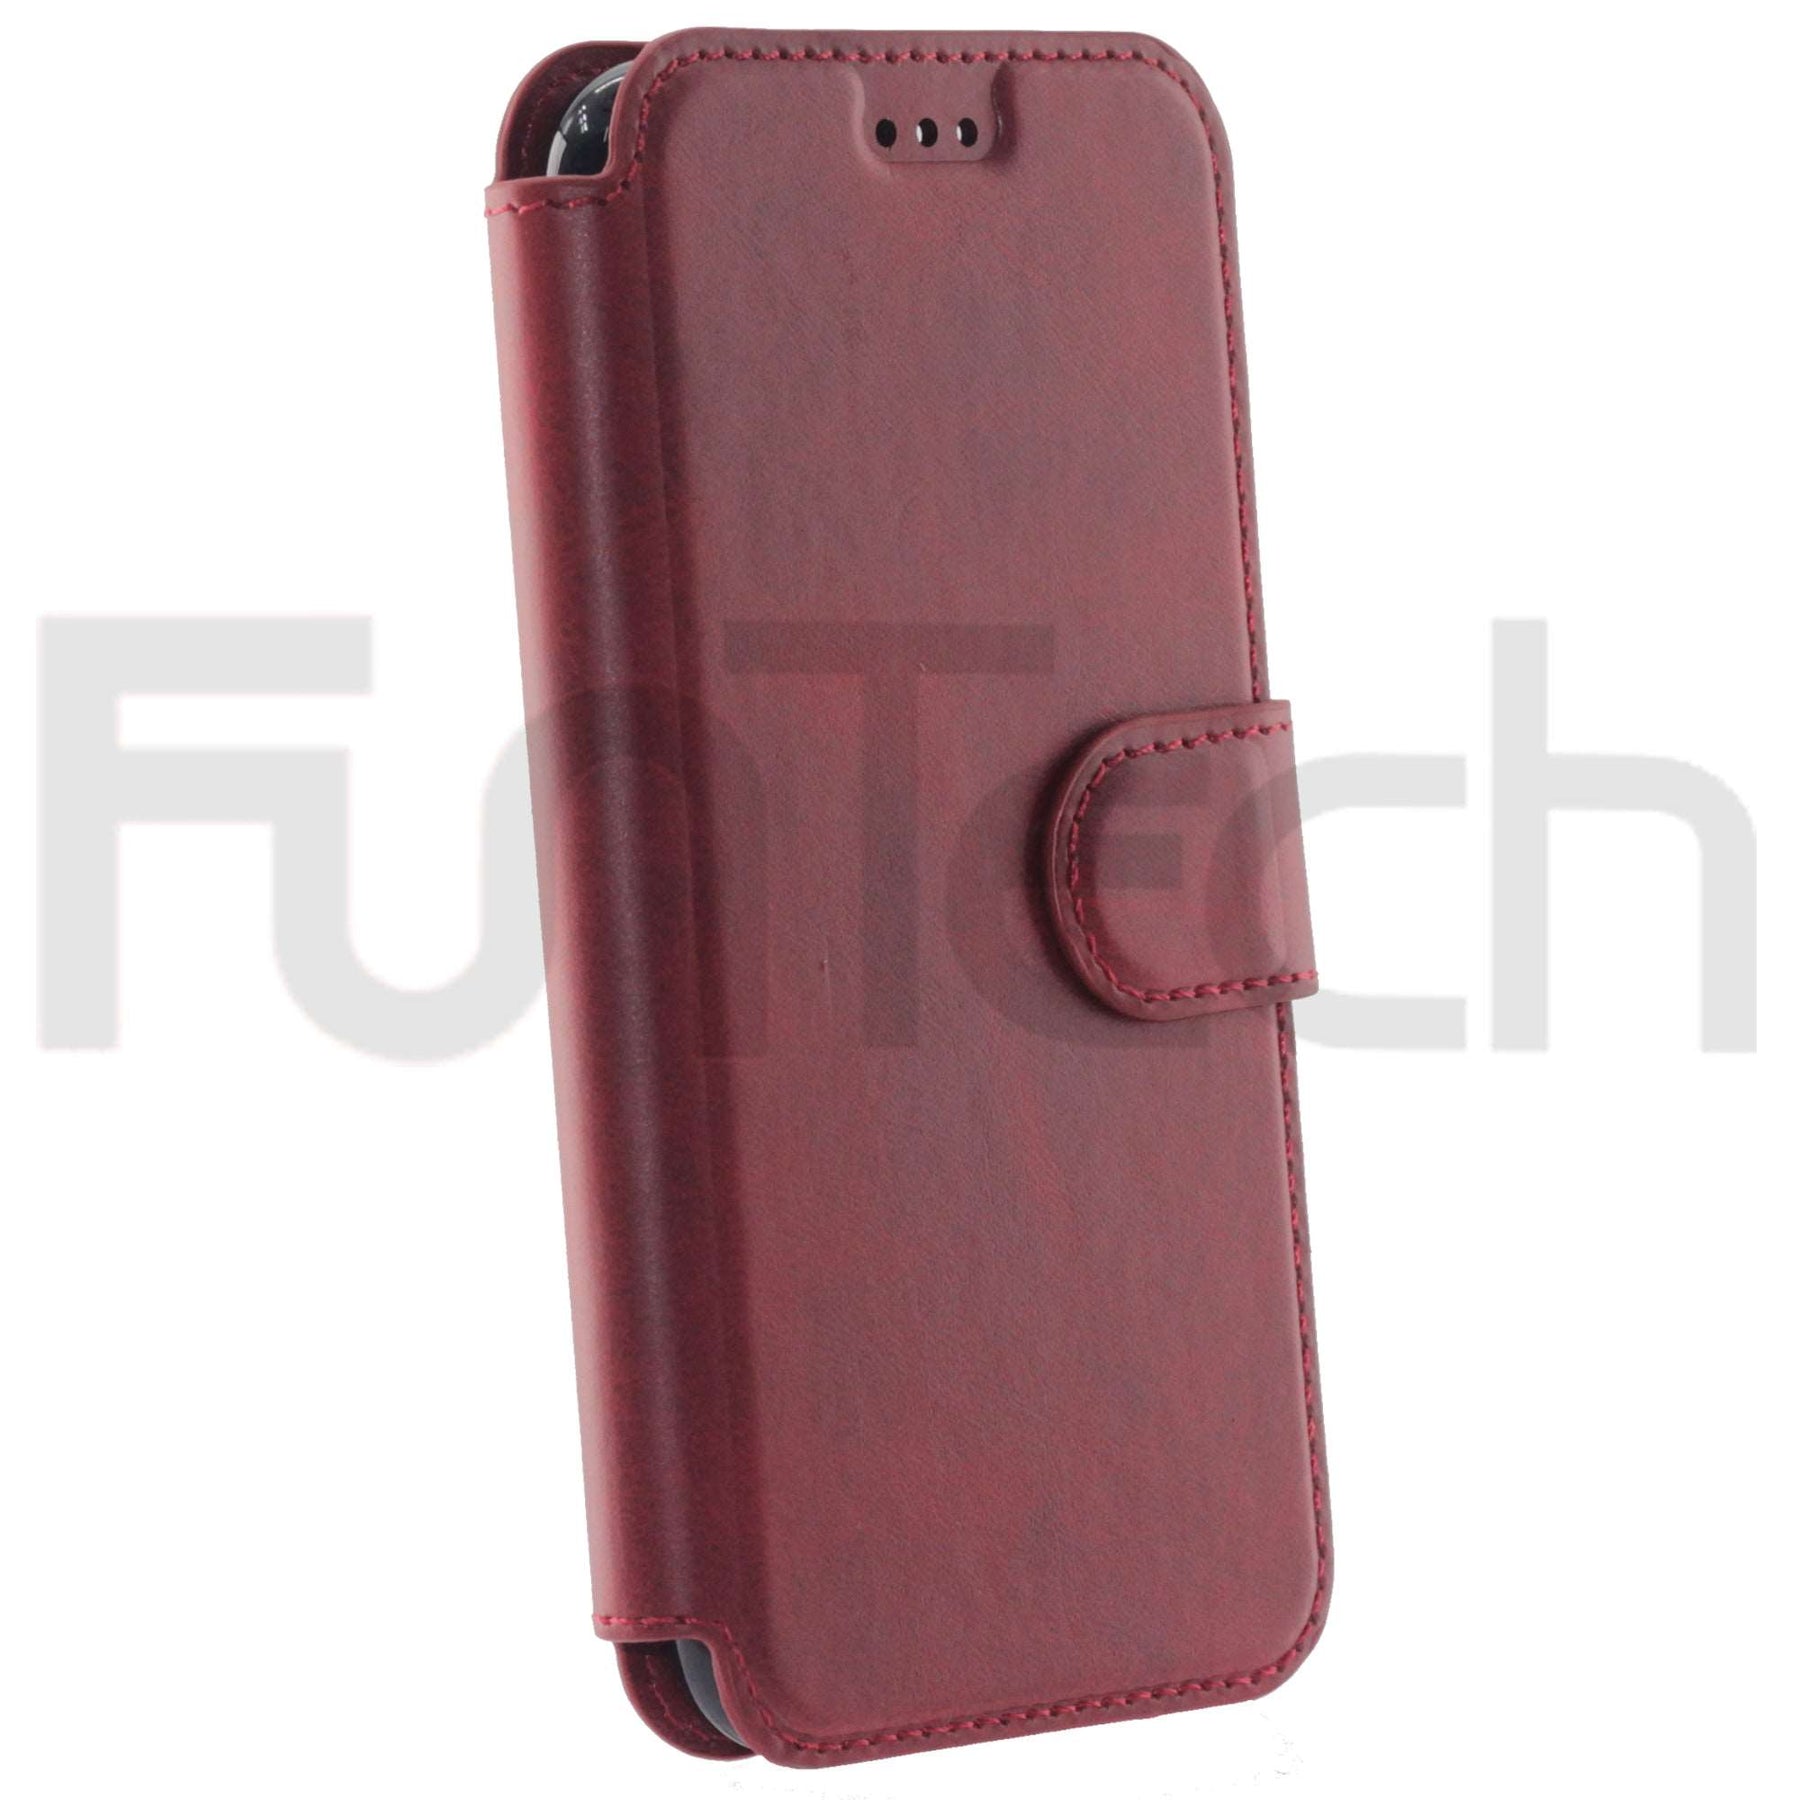 Apple, iPhone 6/6S, Leather Wallet Case, Color Red.